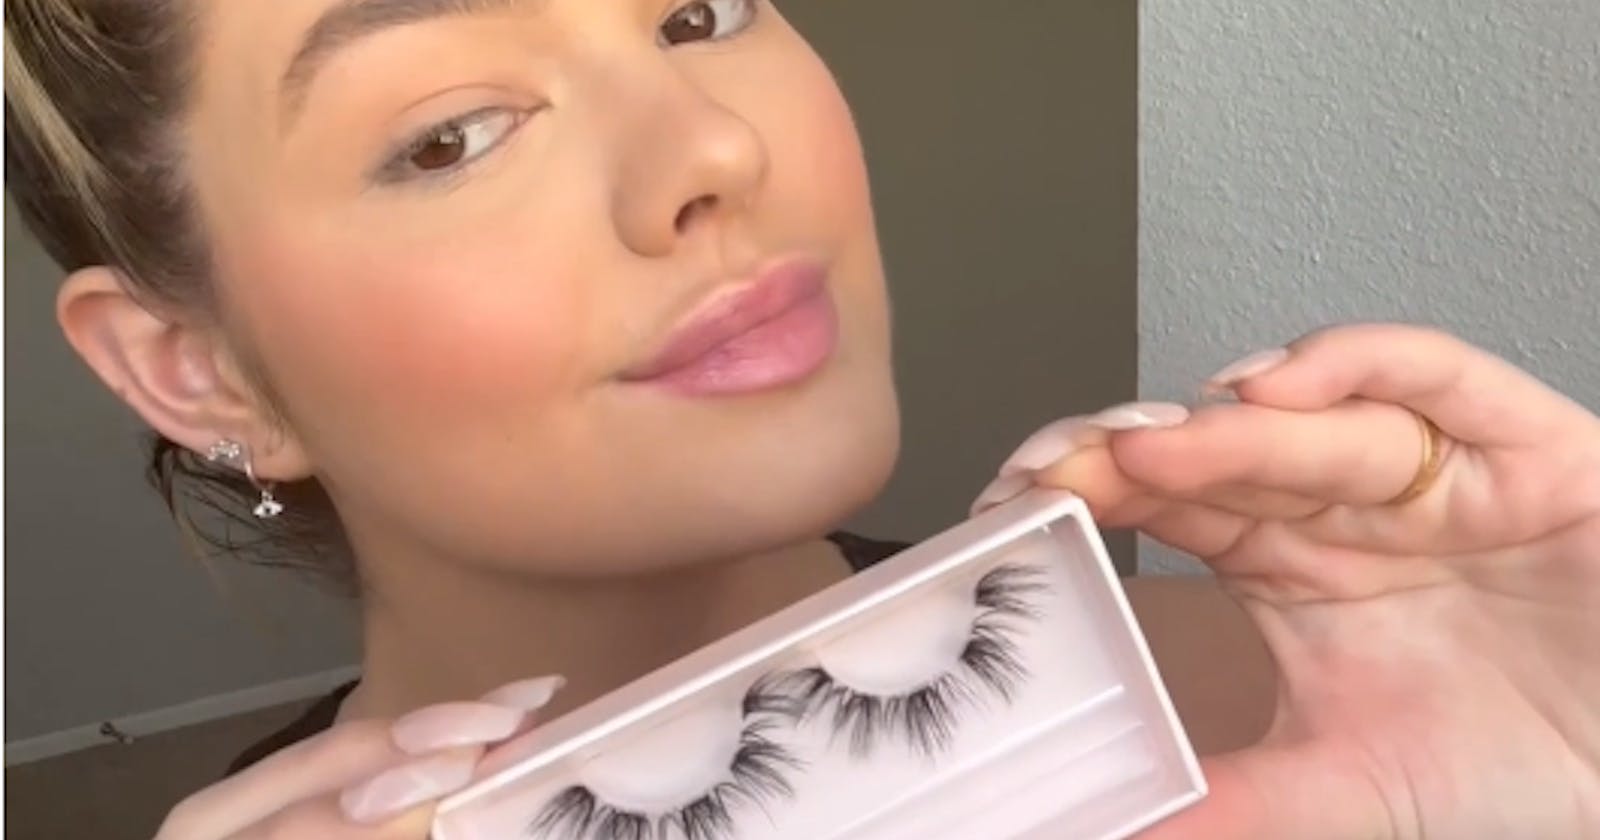 Urban Doll Lash Reviews: Is It A Name That You Can Trust?